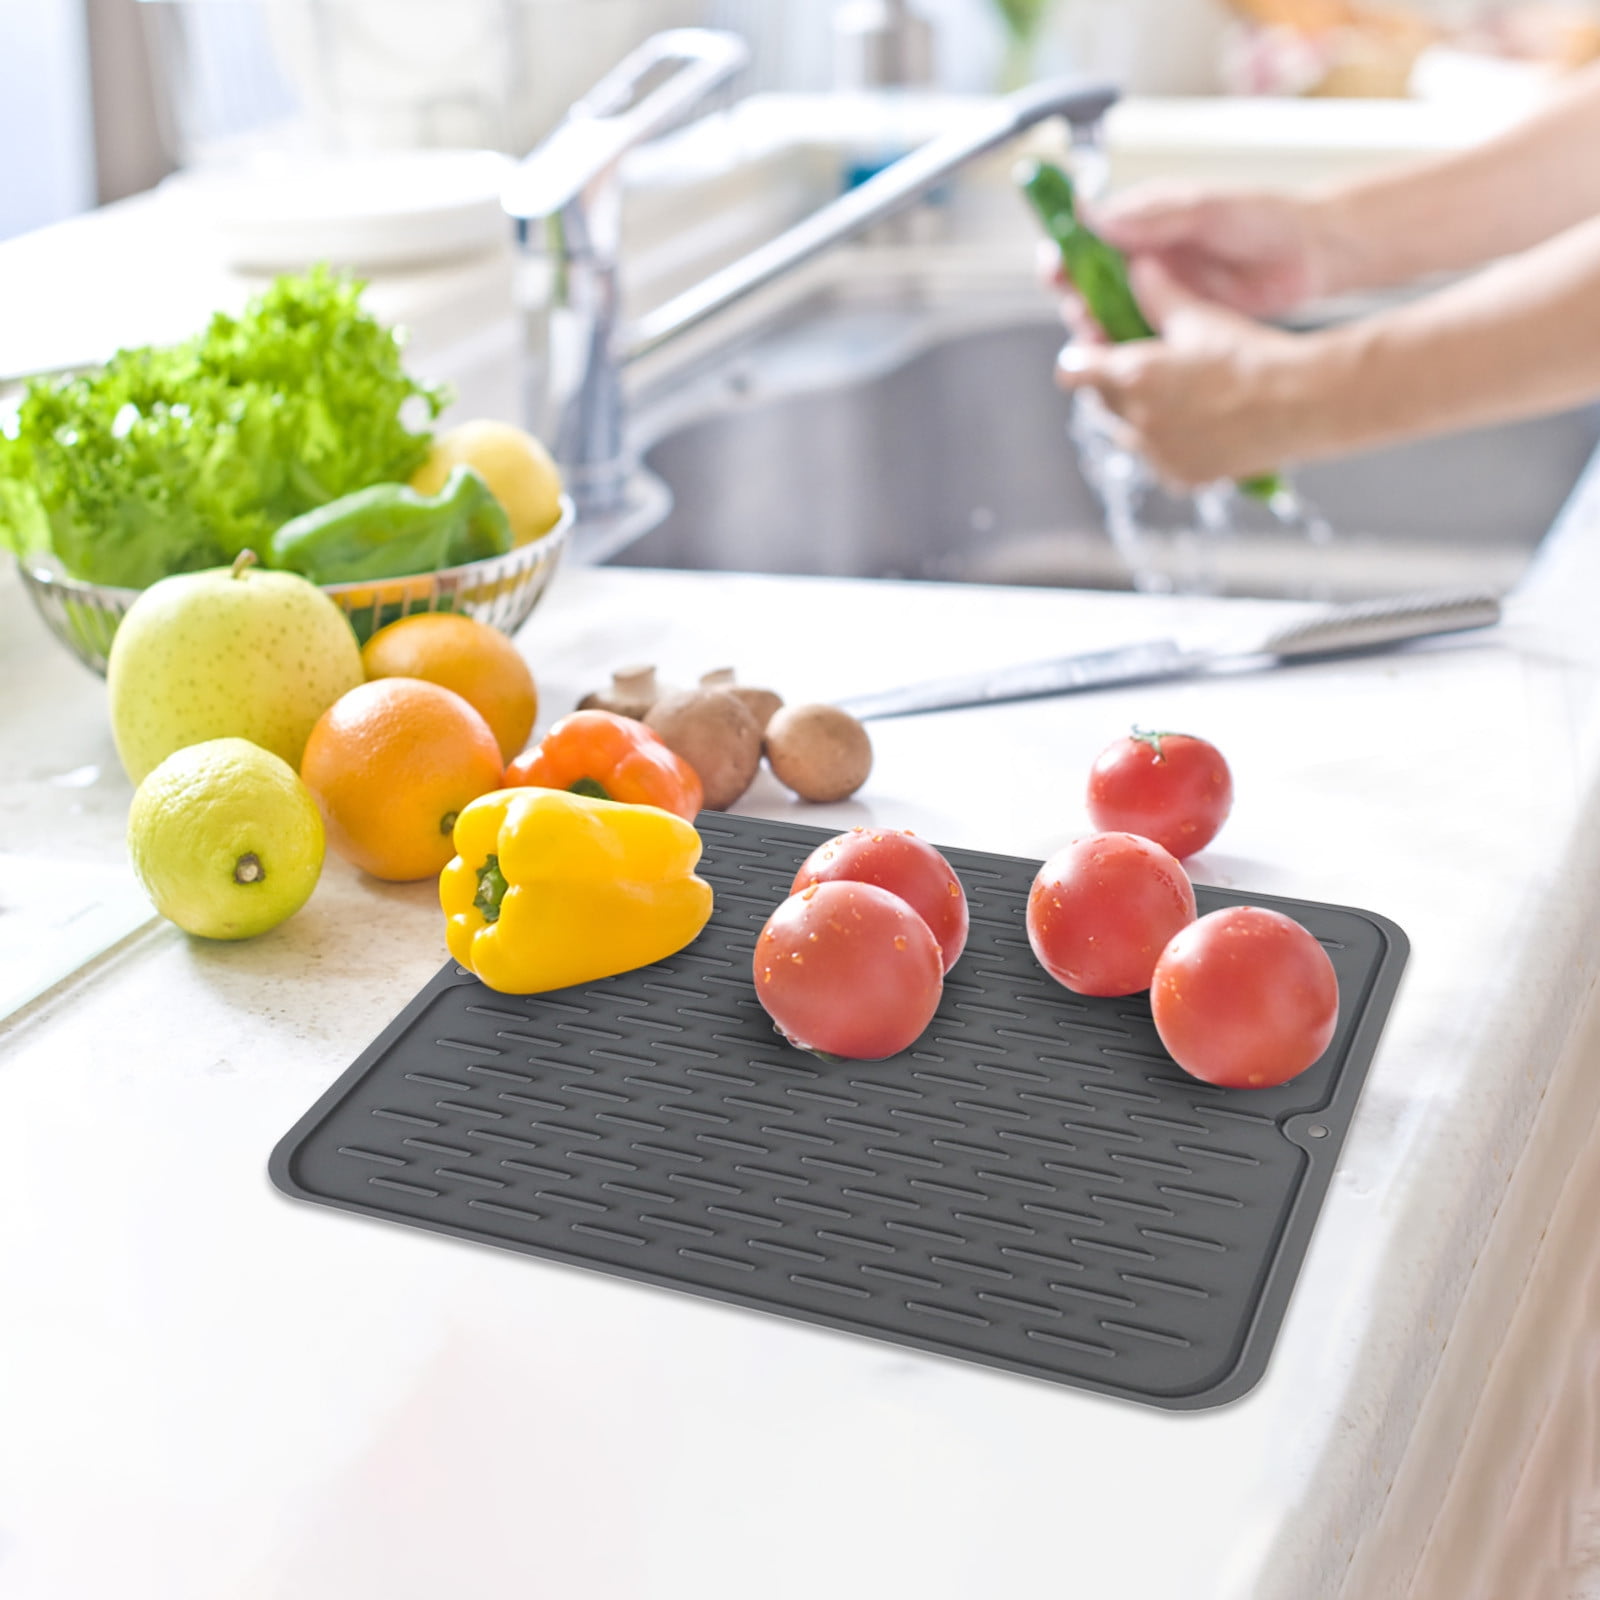 Gorware Dish Drying Mat Silicone Drying Mats for Kitchen Counter, Heat Resistant Washable Rubber Drying Rack Mat for Dishes Easy Clean, Size: Small